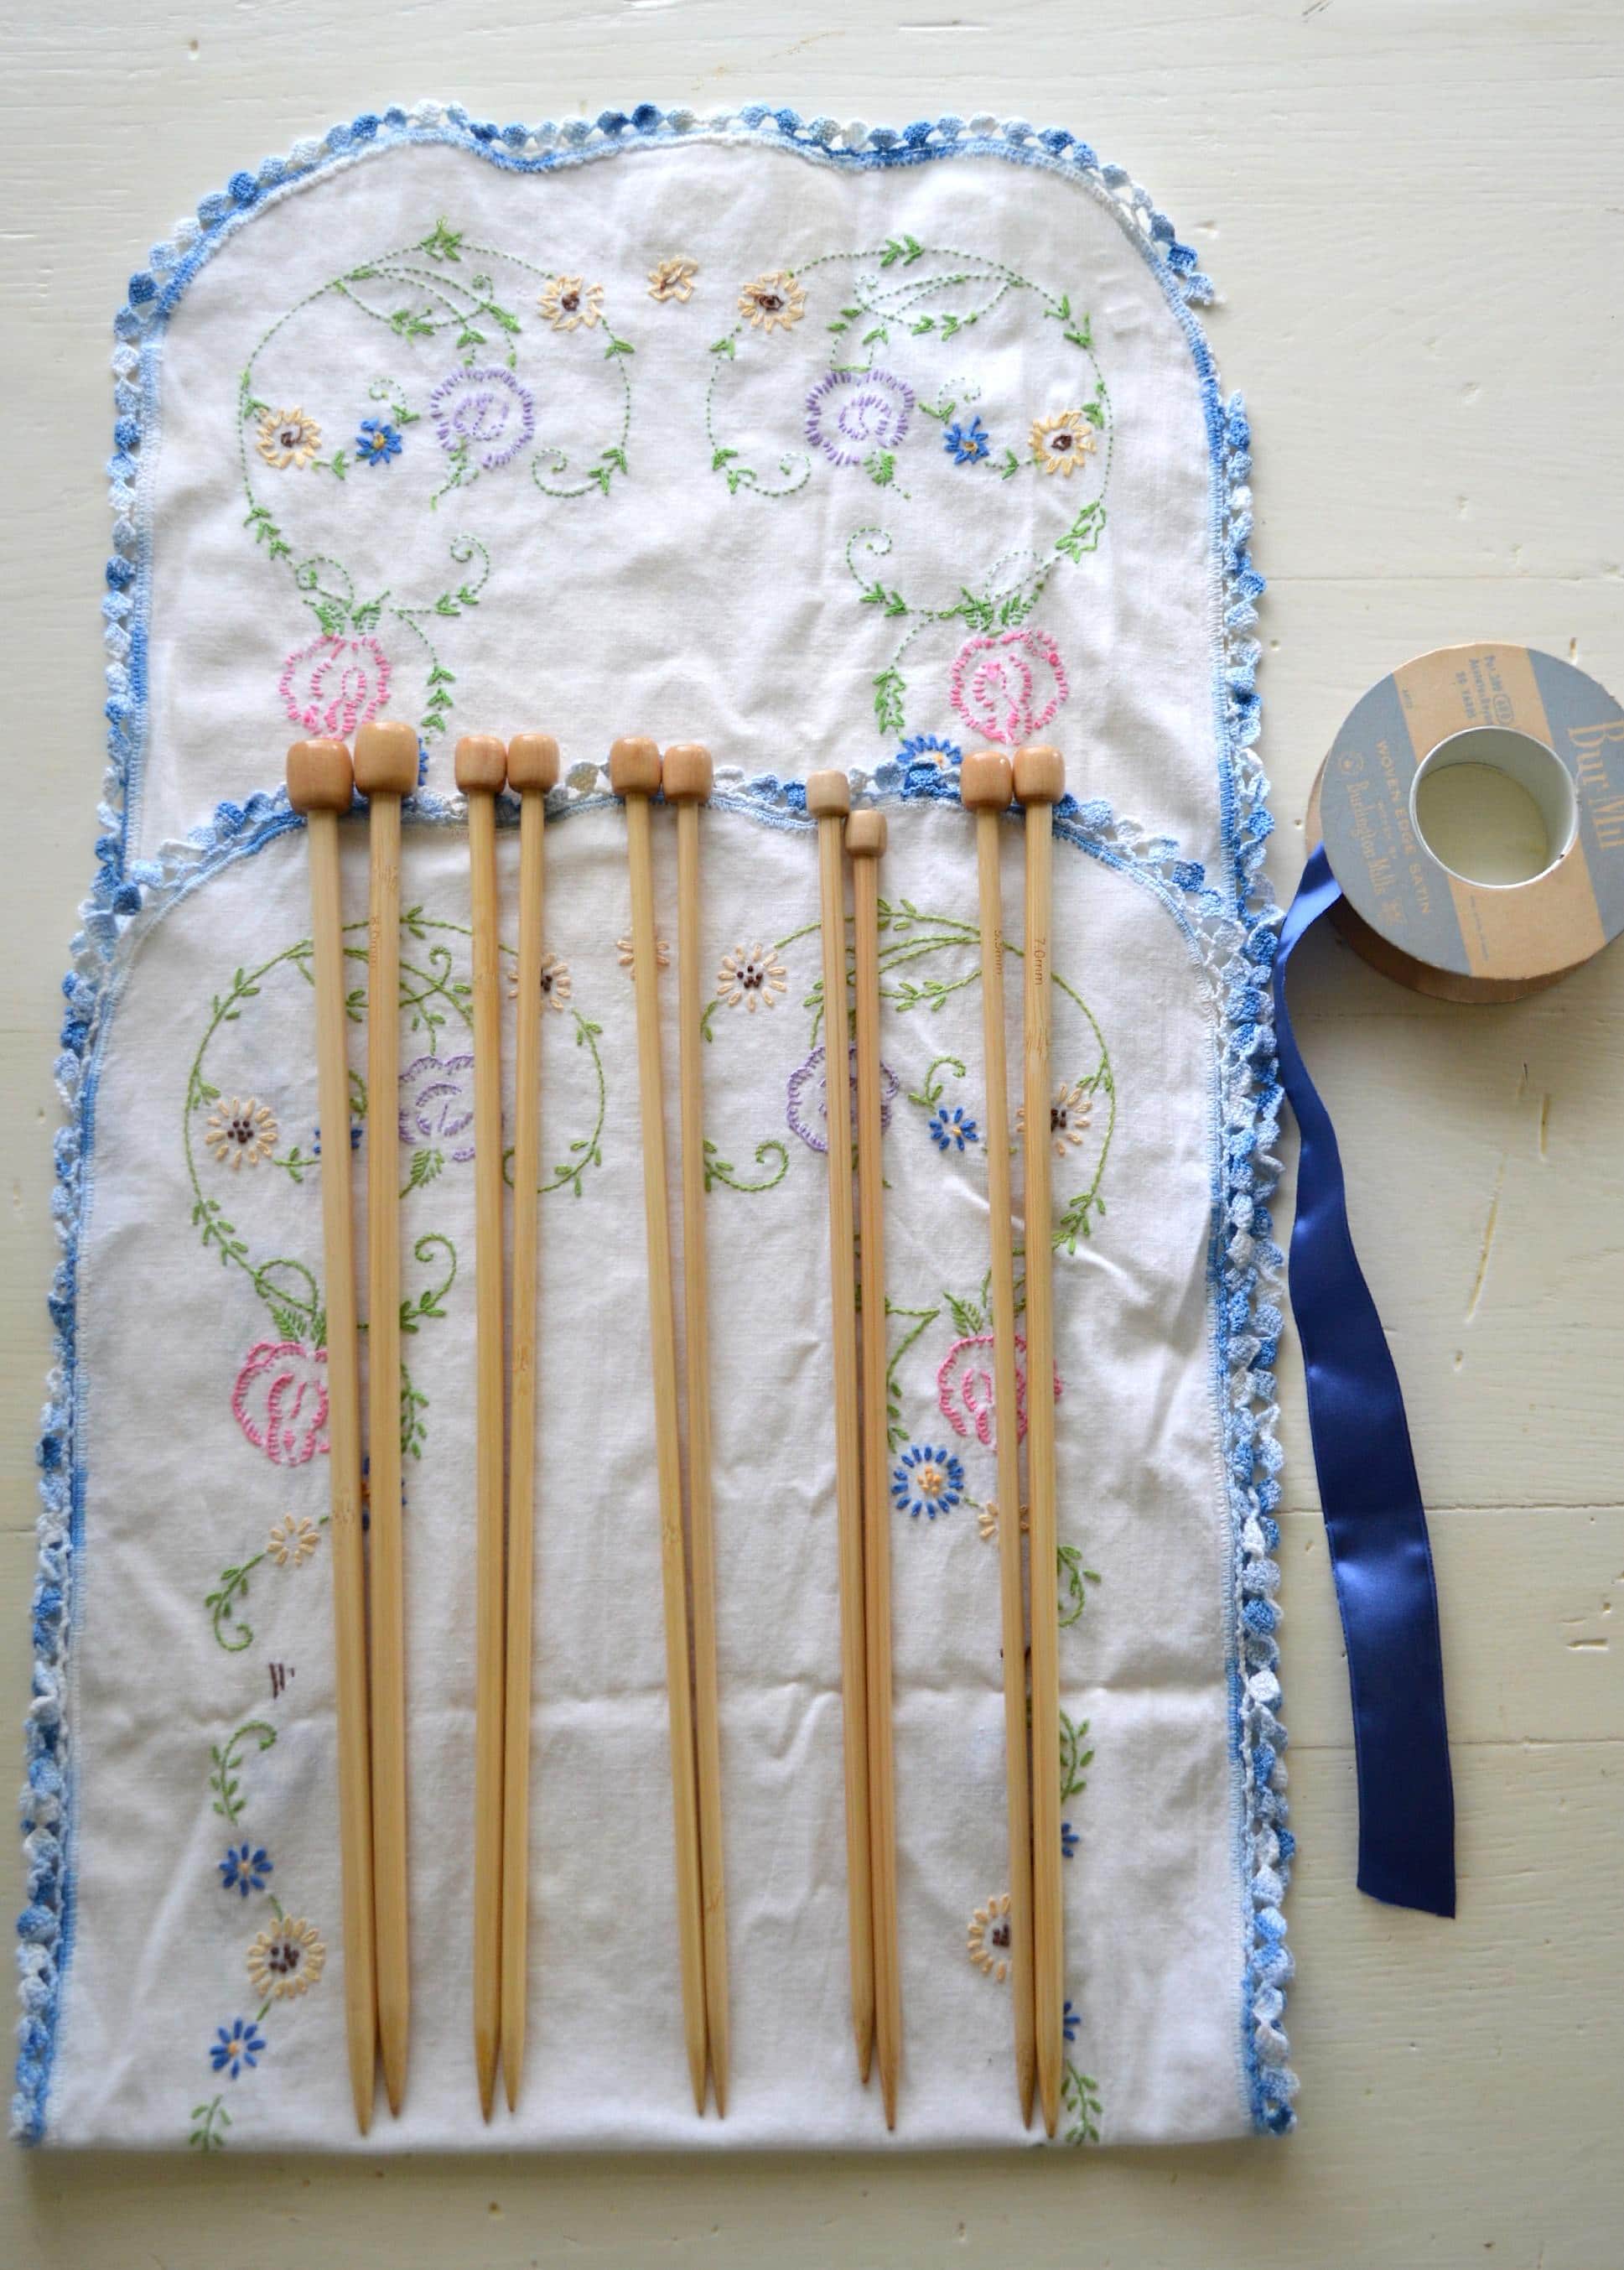 How To Make A Knitting Needle Holder From Vintage Linens MomAdvice